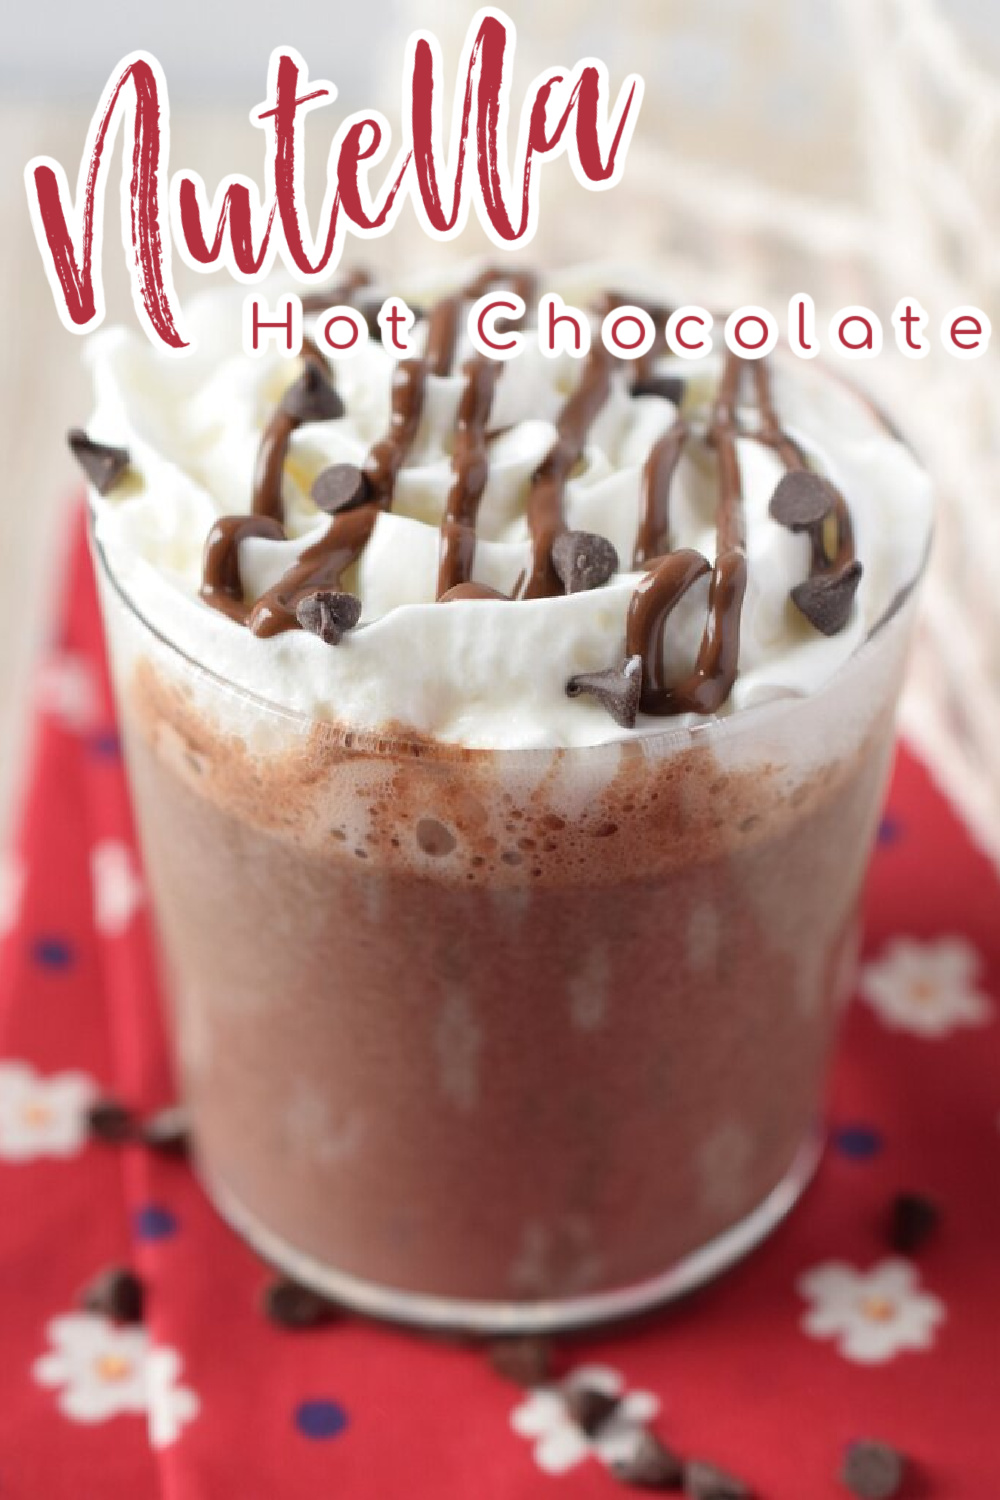 Nutella Hot Chocolate - Take your hot chocolate to the next level by adding nutella! Made with just 3 simple ingredients in 10 minutes! Nutella Hot Chocolate | Hot Chocolate Recipe | Nutella Drink